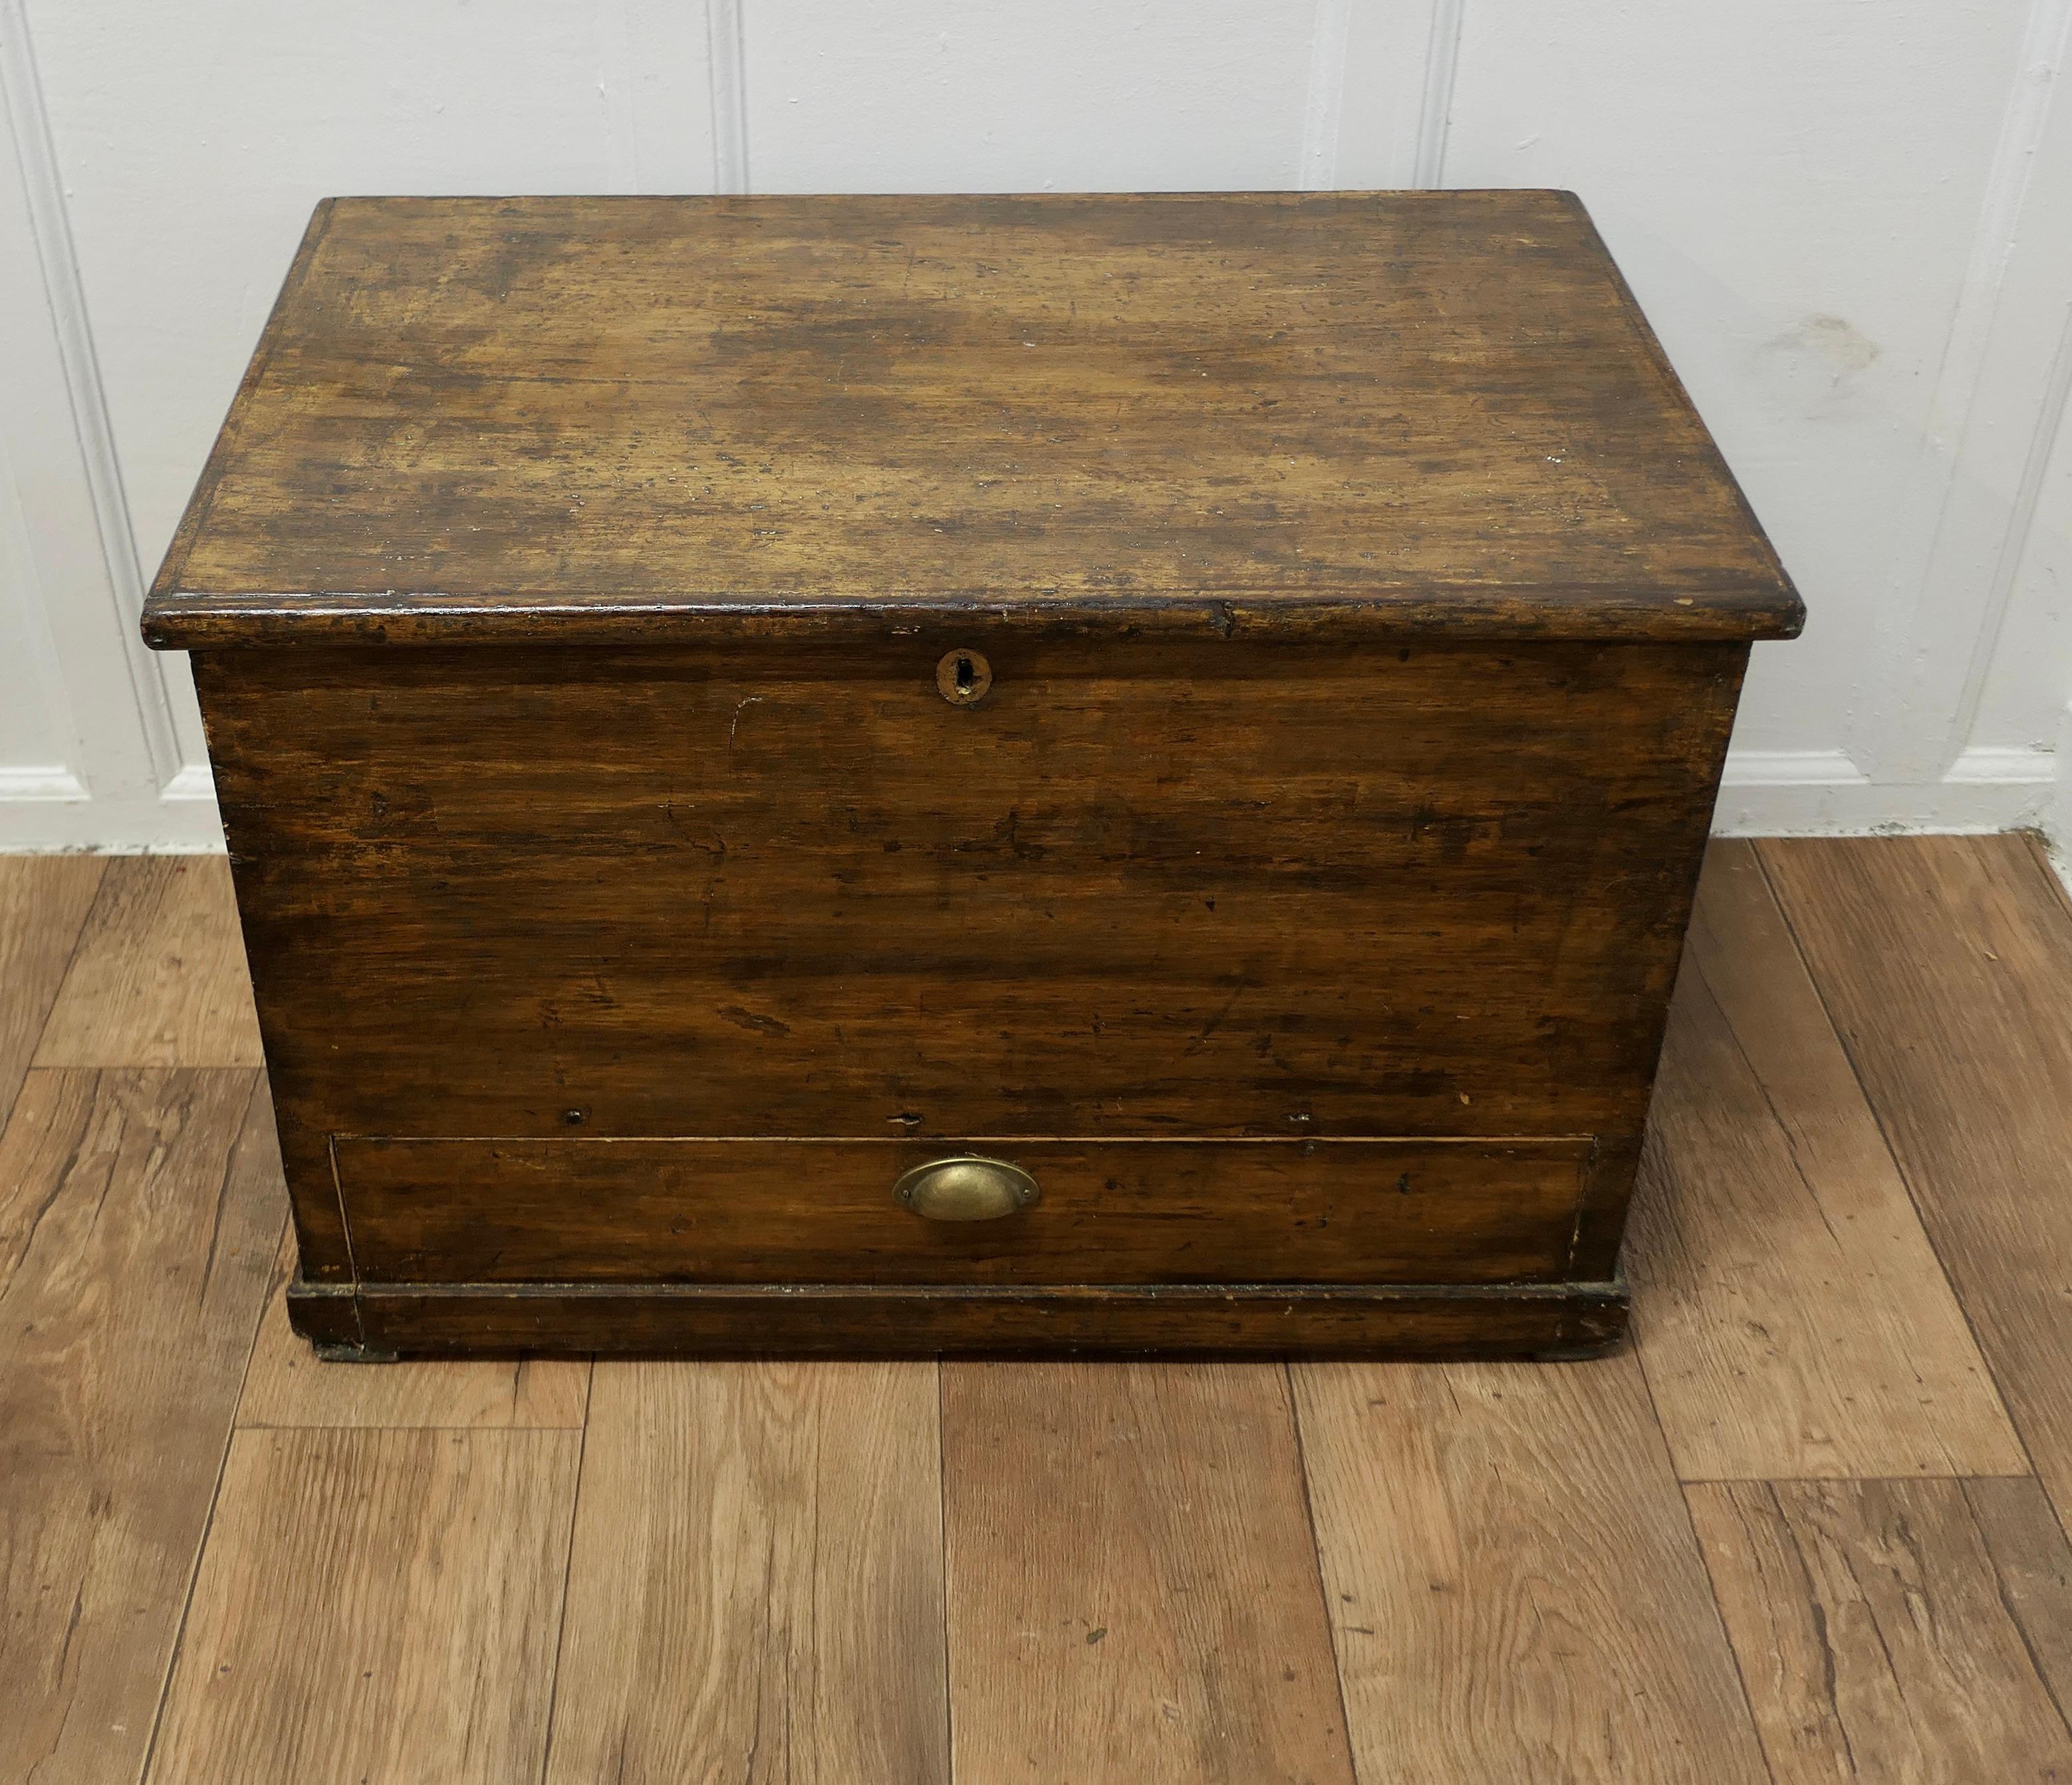  Victorian Solid Pine Mule Chest.

The Chest is a sturdy piece, it has a concealed drawer at the bottom
The top of the box has a moulded edge, and the interior has some of the original decorative lining paper still intact, the exterior is in its